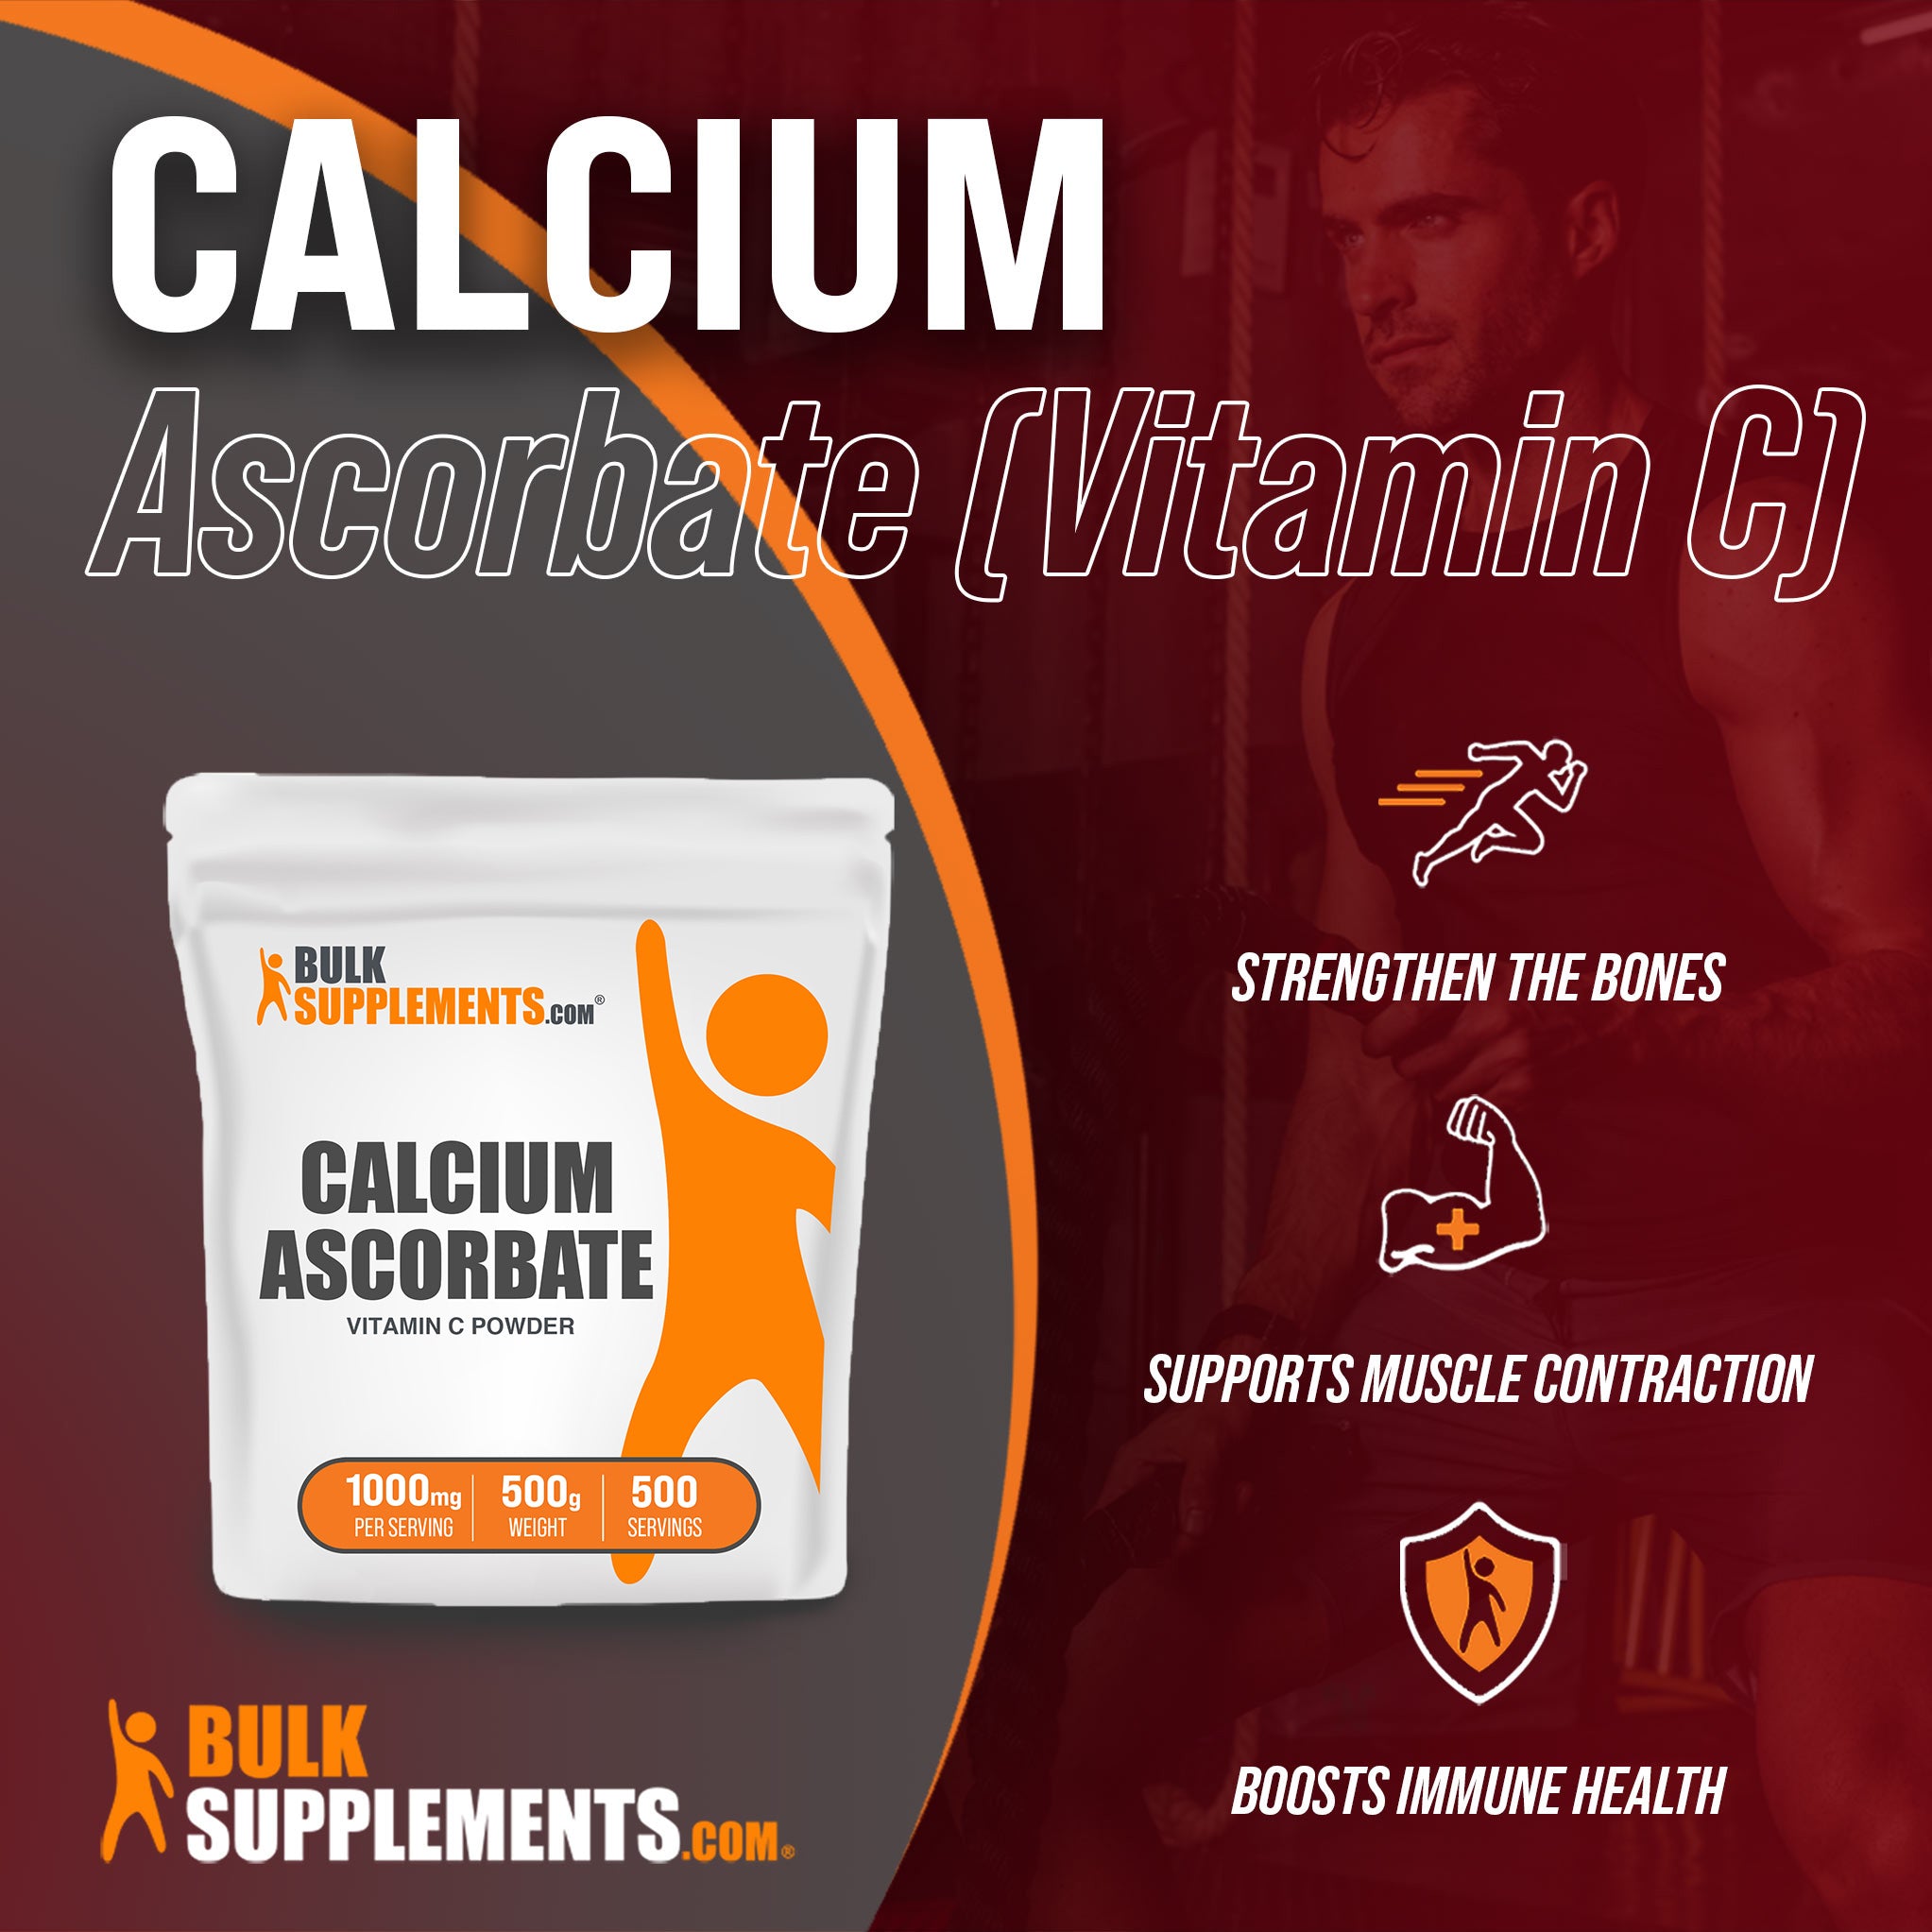 Benefits of Calcium Ascorbate (Vitamin C); strengthen the bones, supports muscle contraction, boosts immune health